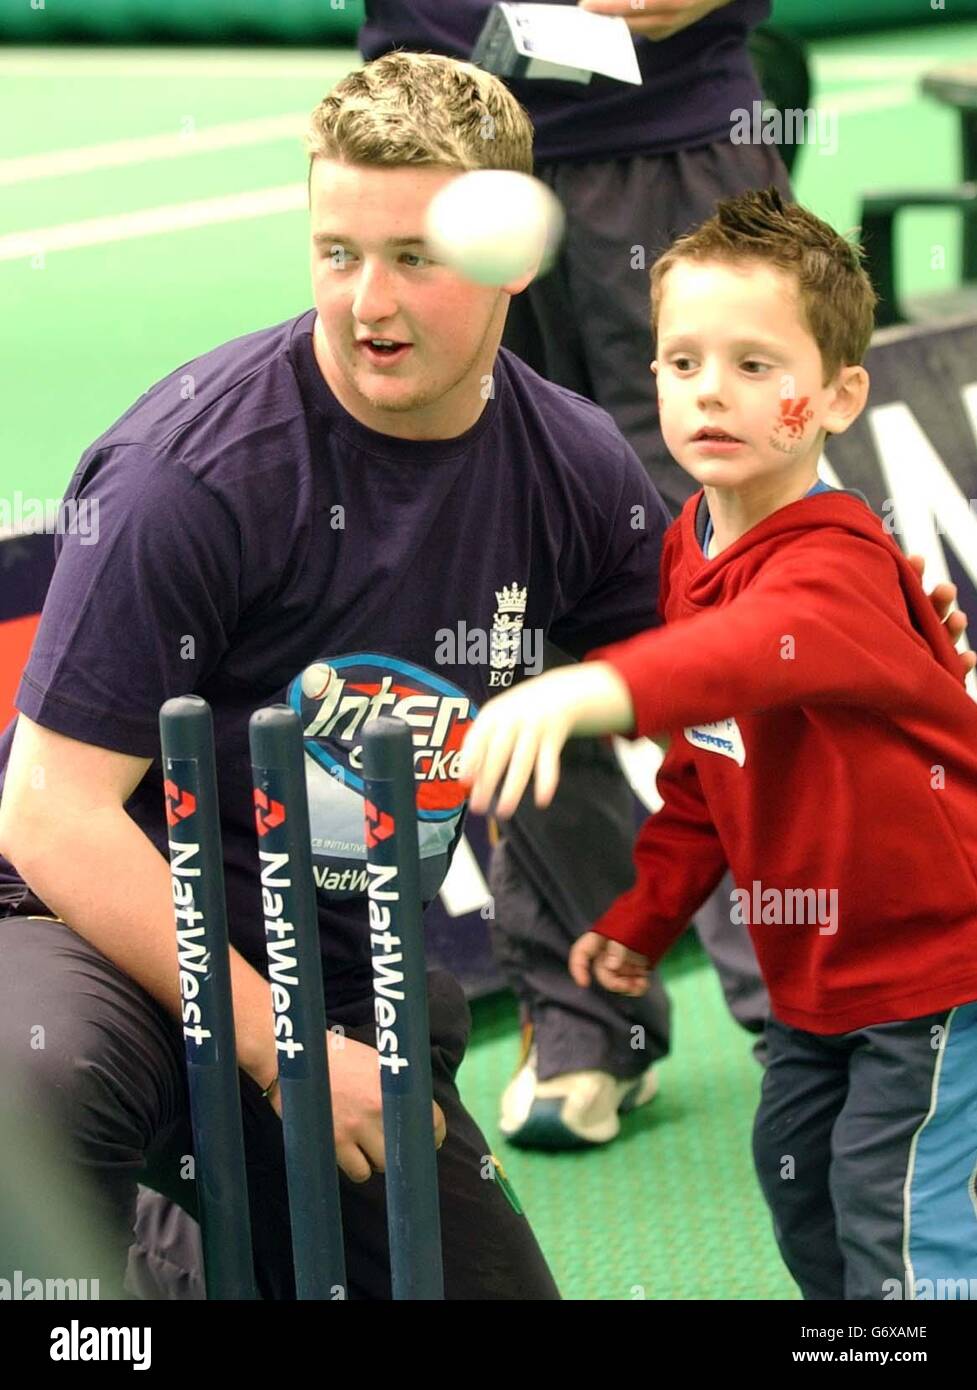 NatWest Speed Stars 2004. Glamorgan cricketer Richard Grant helps Sam Proctor from Cardiff with his bowling technique. Now in its third year, the NatWest Speed Stars competition is a nationwide competition to find the UK s fastest young bowlers. Open to all boys and girls under 18 years old, it offers juniors the chance to test their bowling speed with the possibility of qualifying for the NatWest Speed Stars final at Lord's on 5 September. Stock Photo